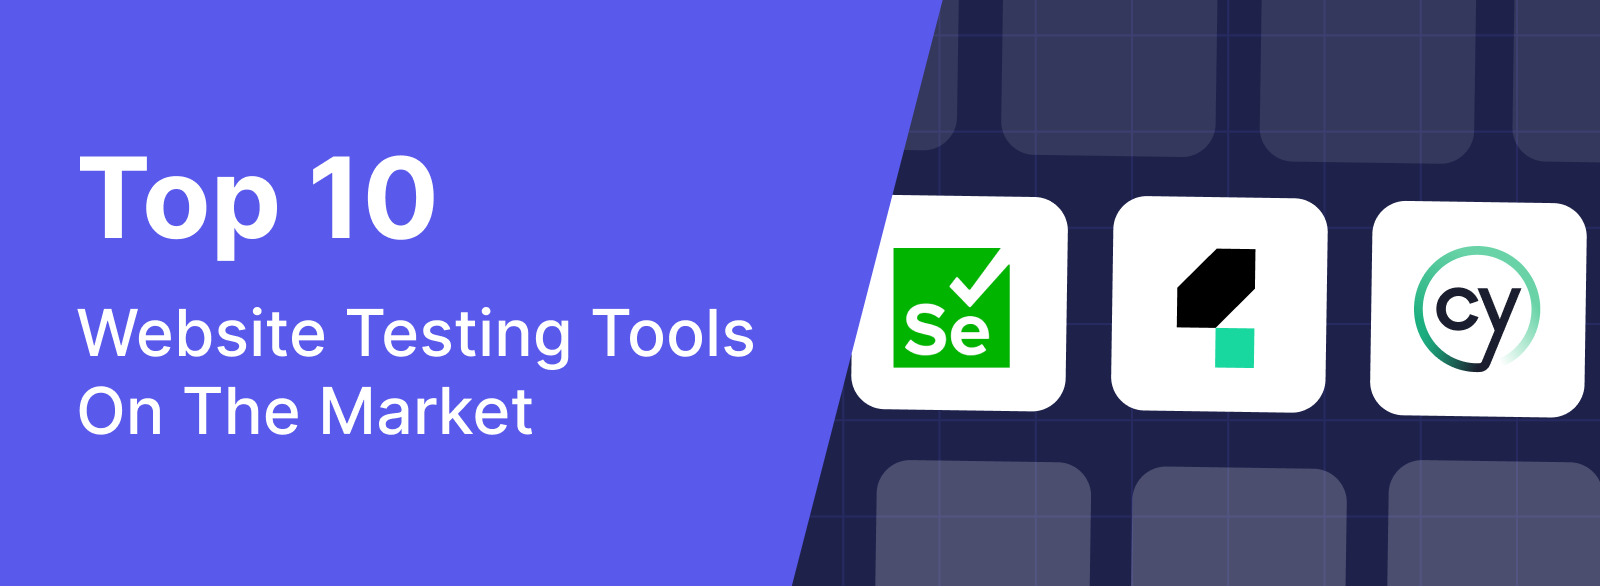 Top 10 web testing tools on the market for QA teams